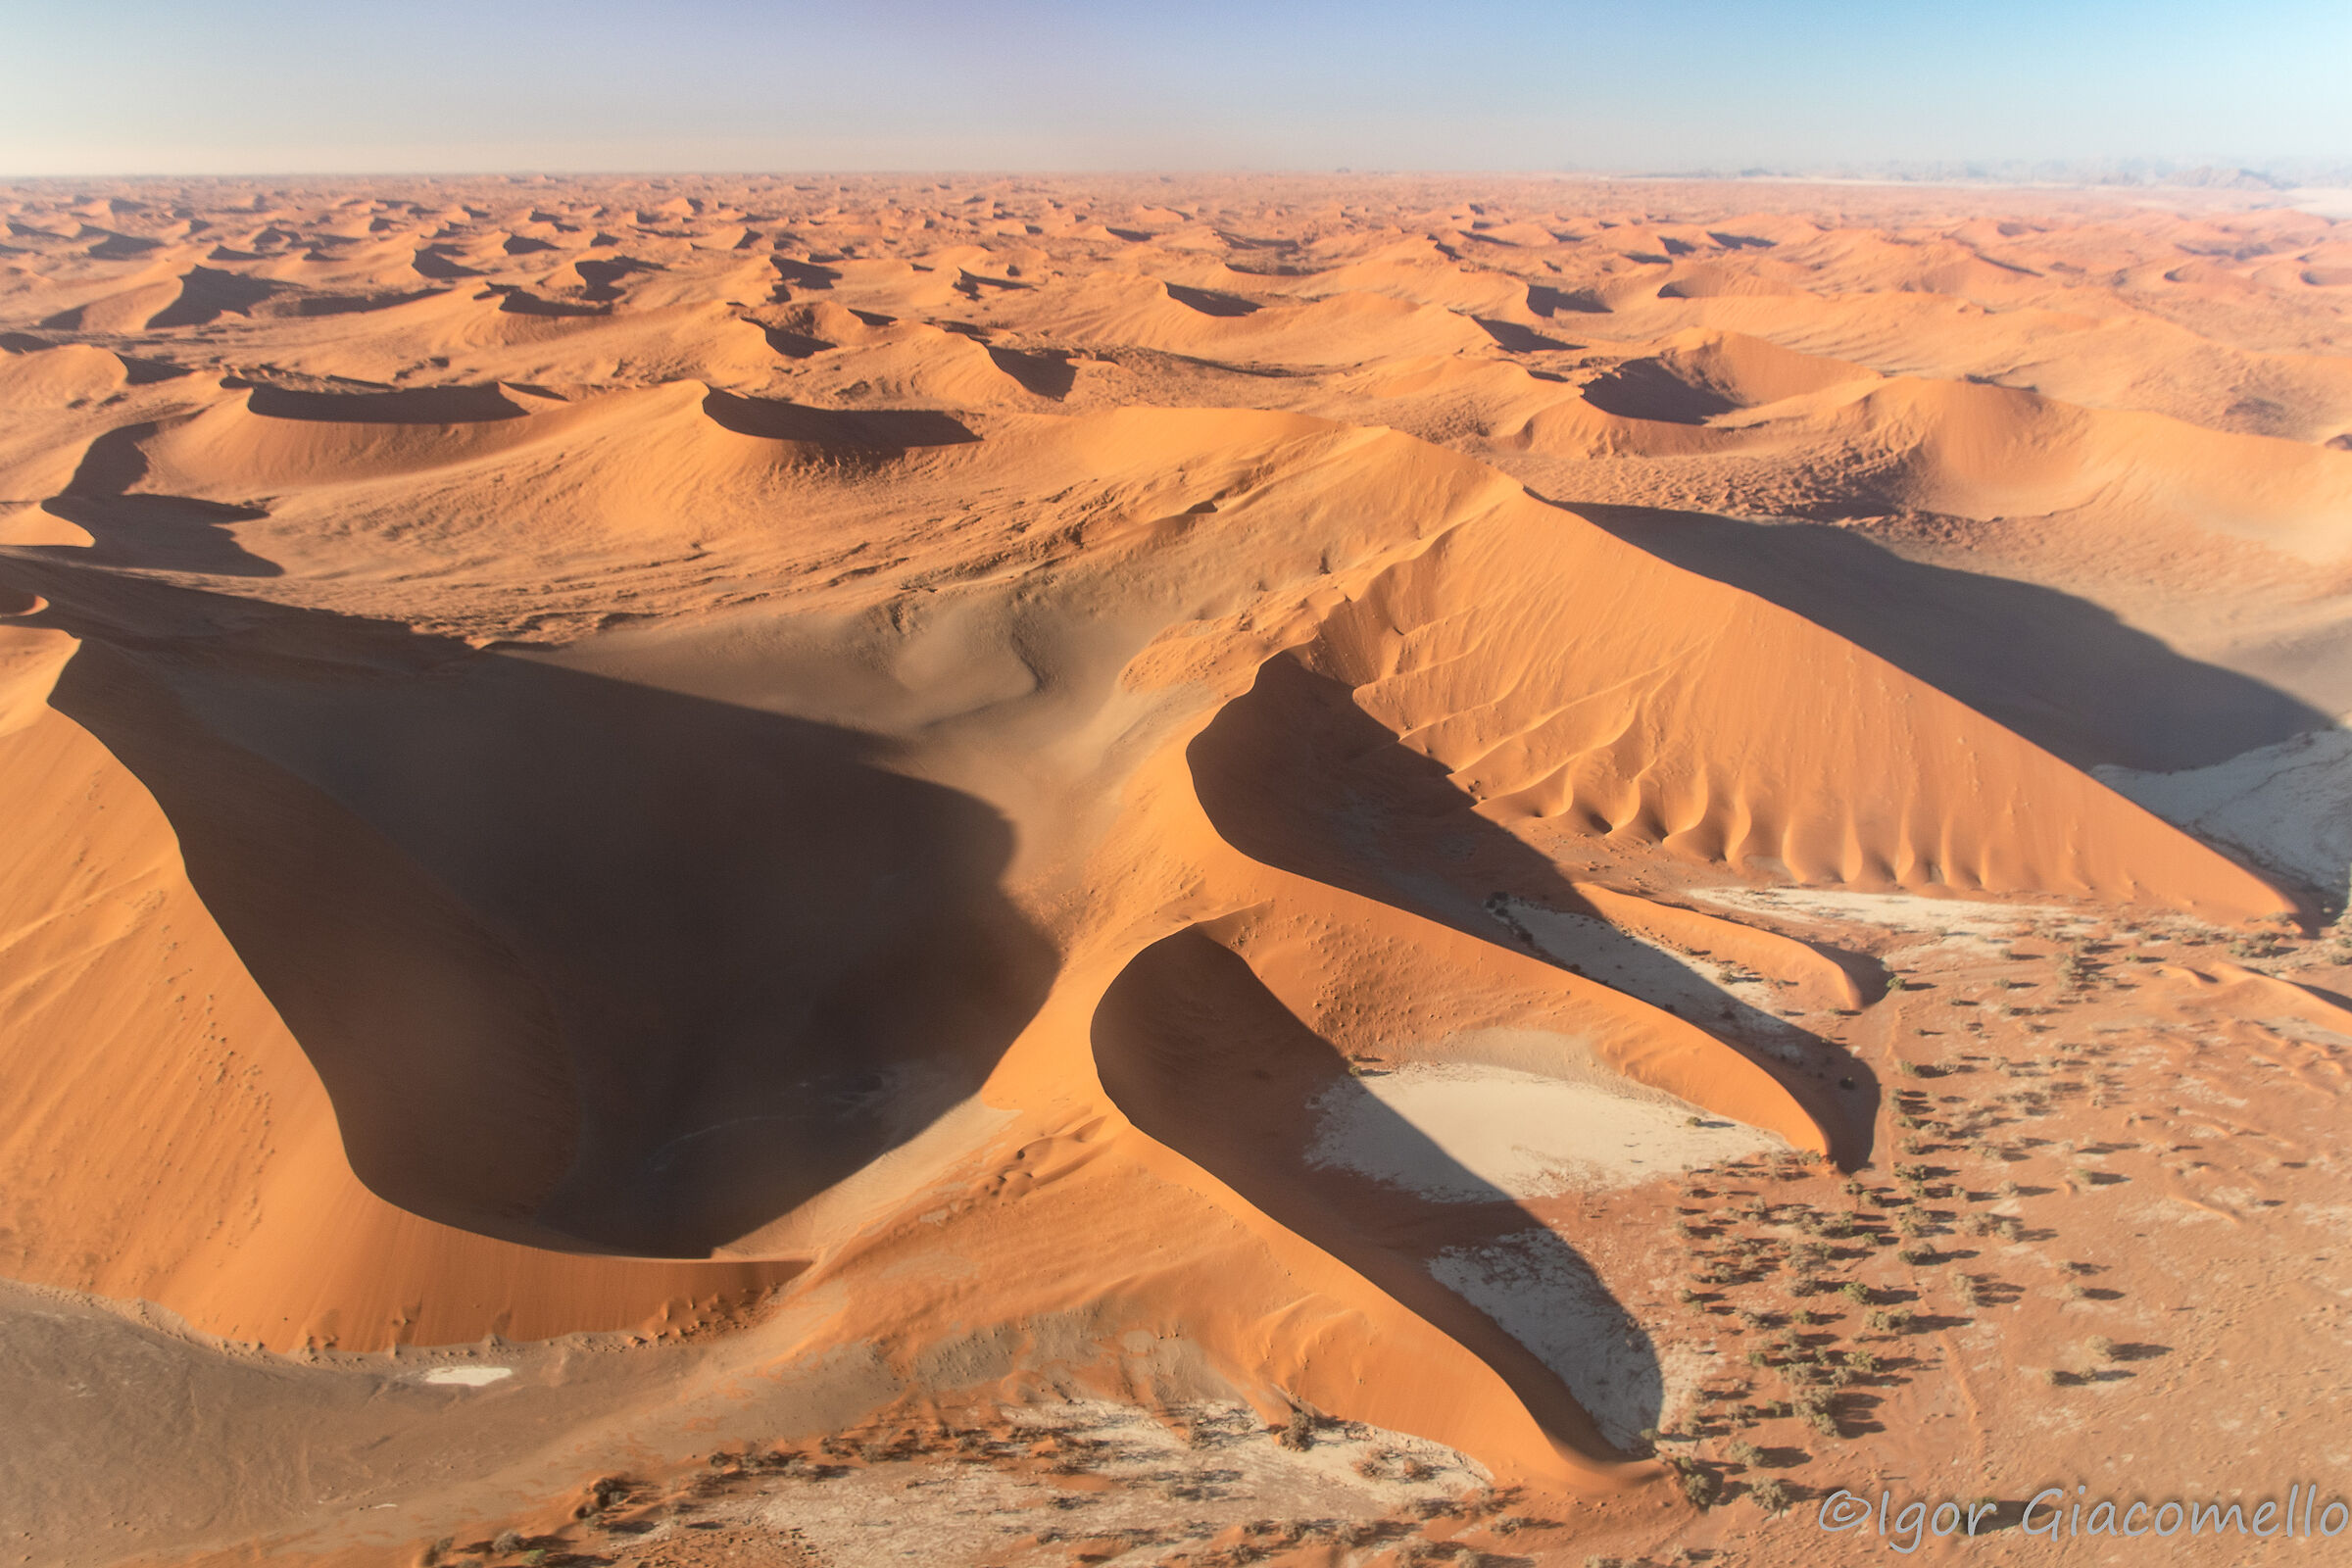 Flying over the Namib...